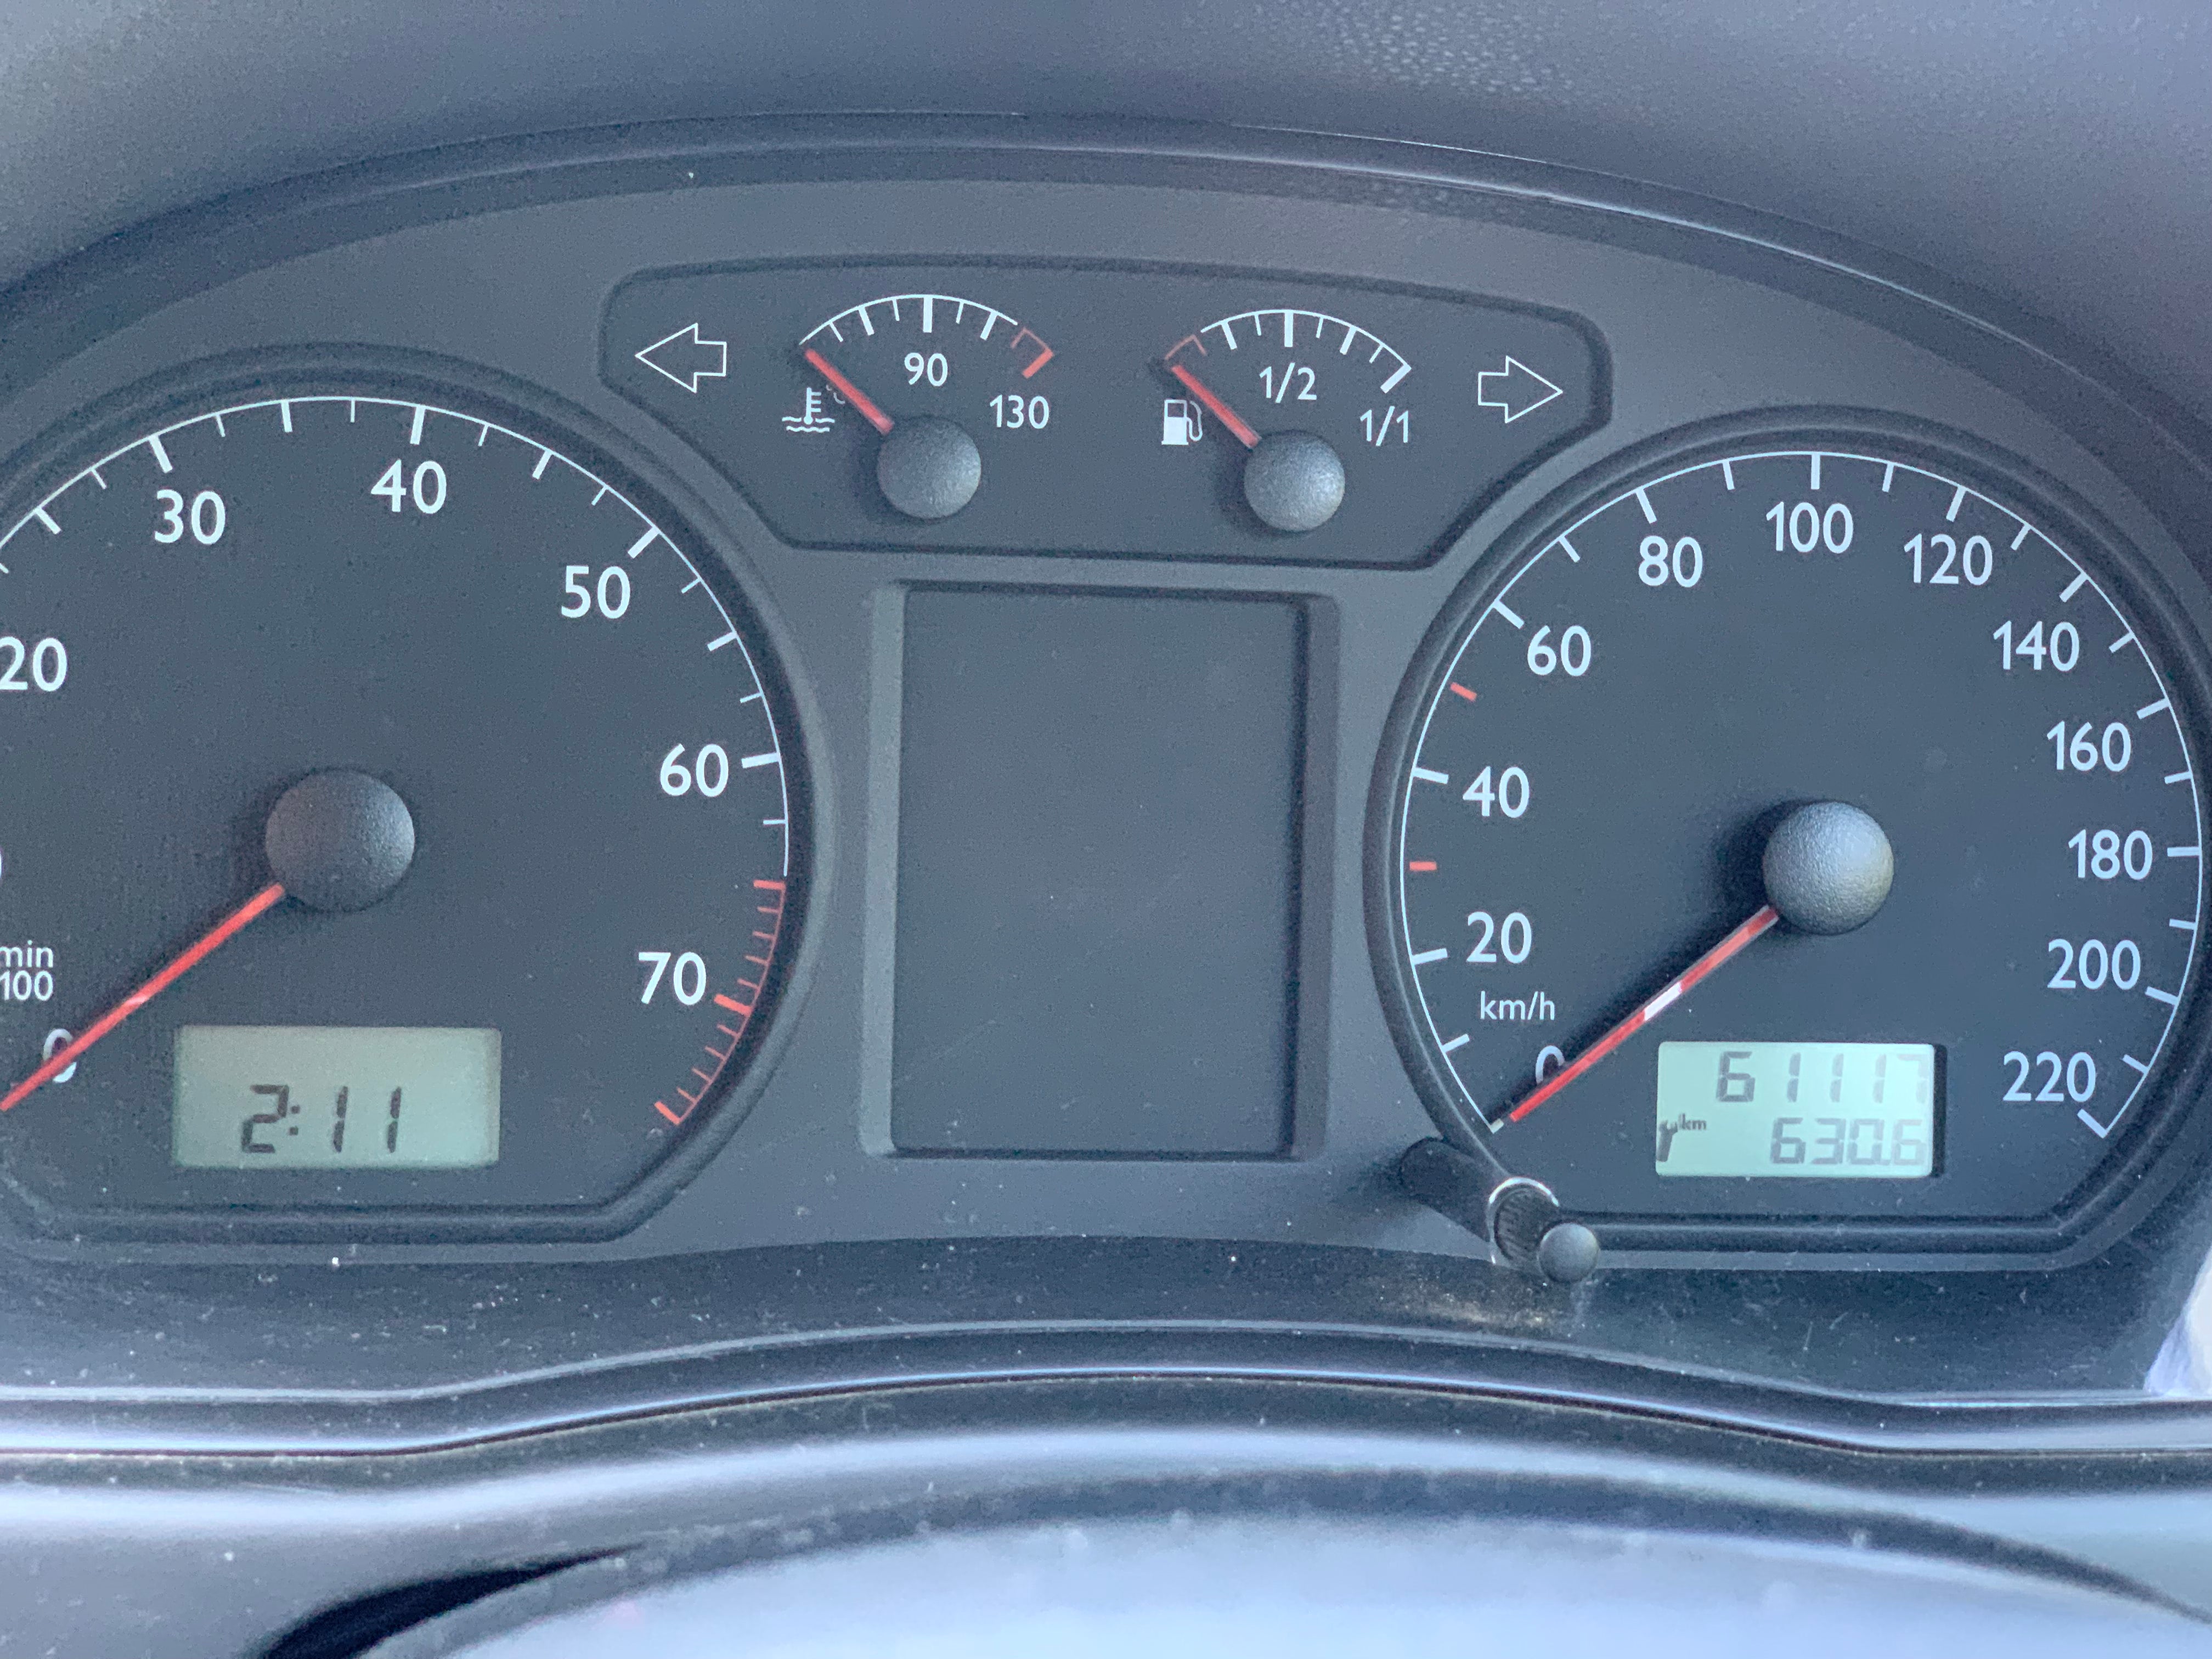 2005 POLO 1.6i with only 61000km